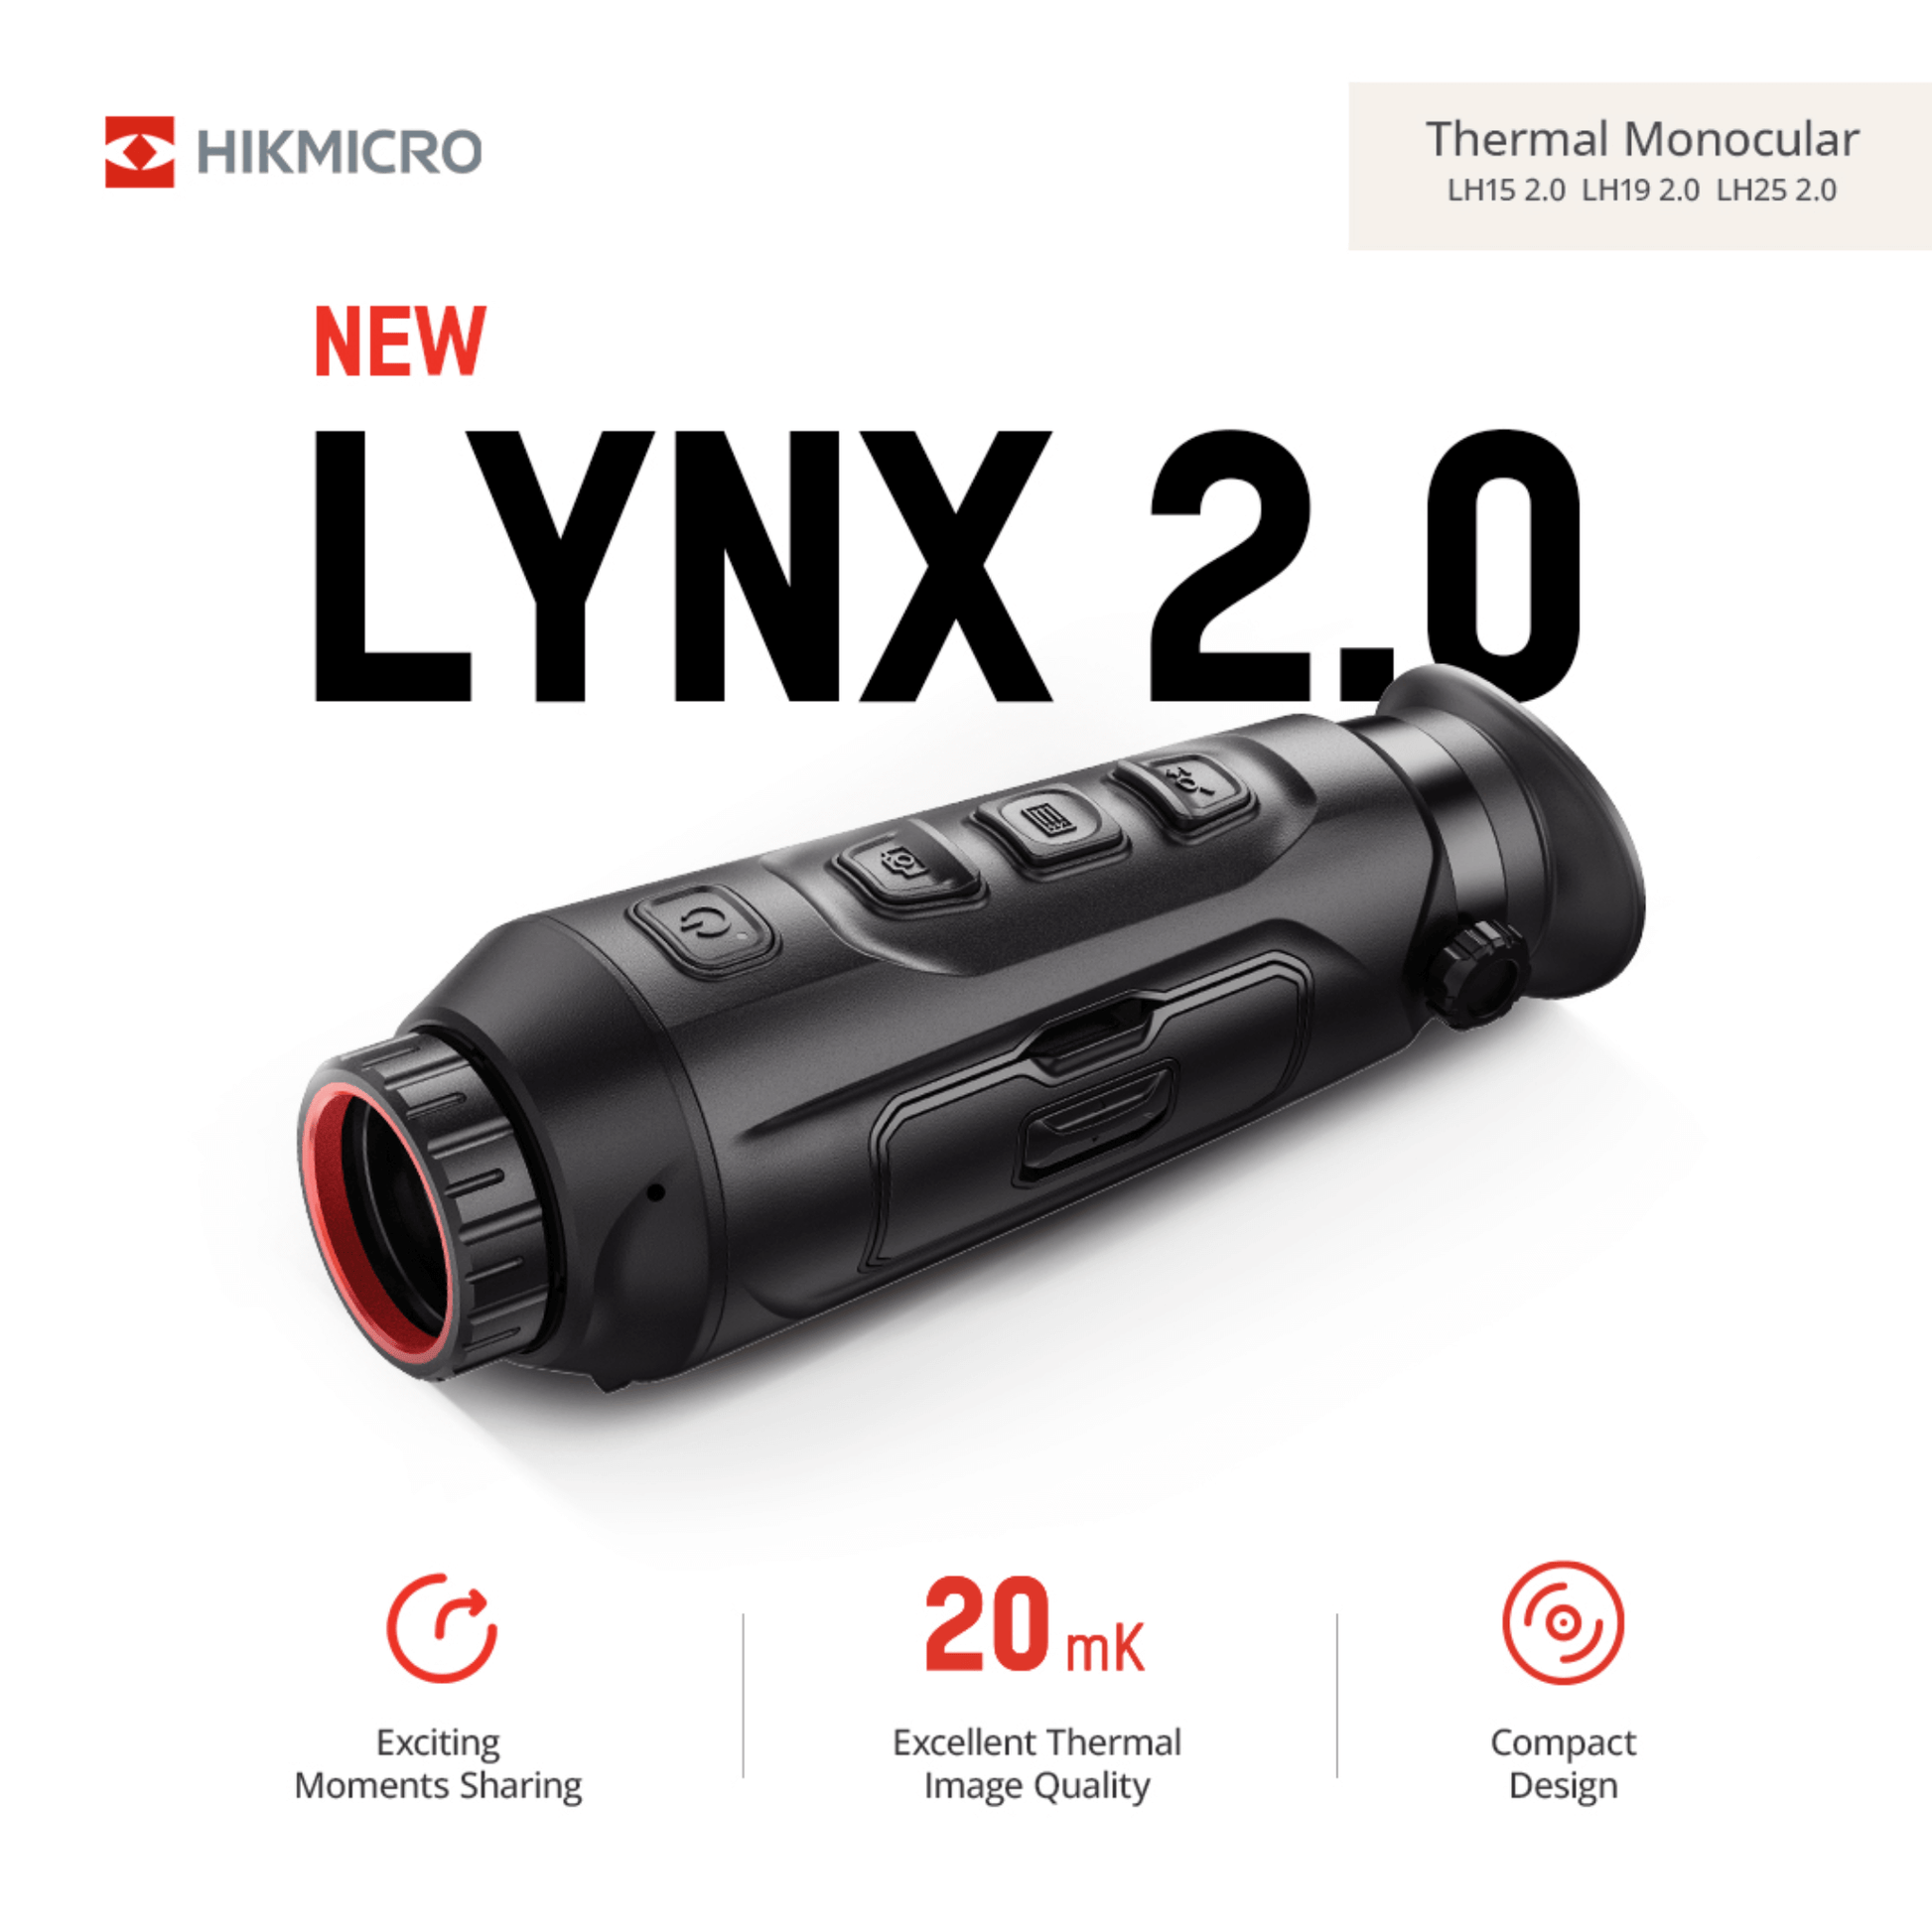 Lynx LH19 2.0 Handheld Thermal Spotter Product Banner